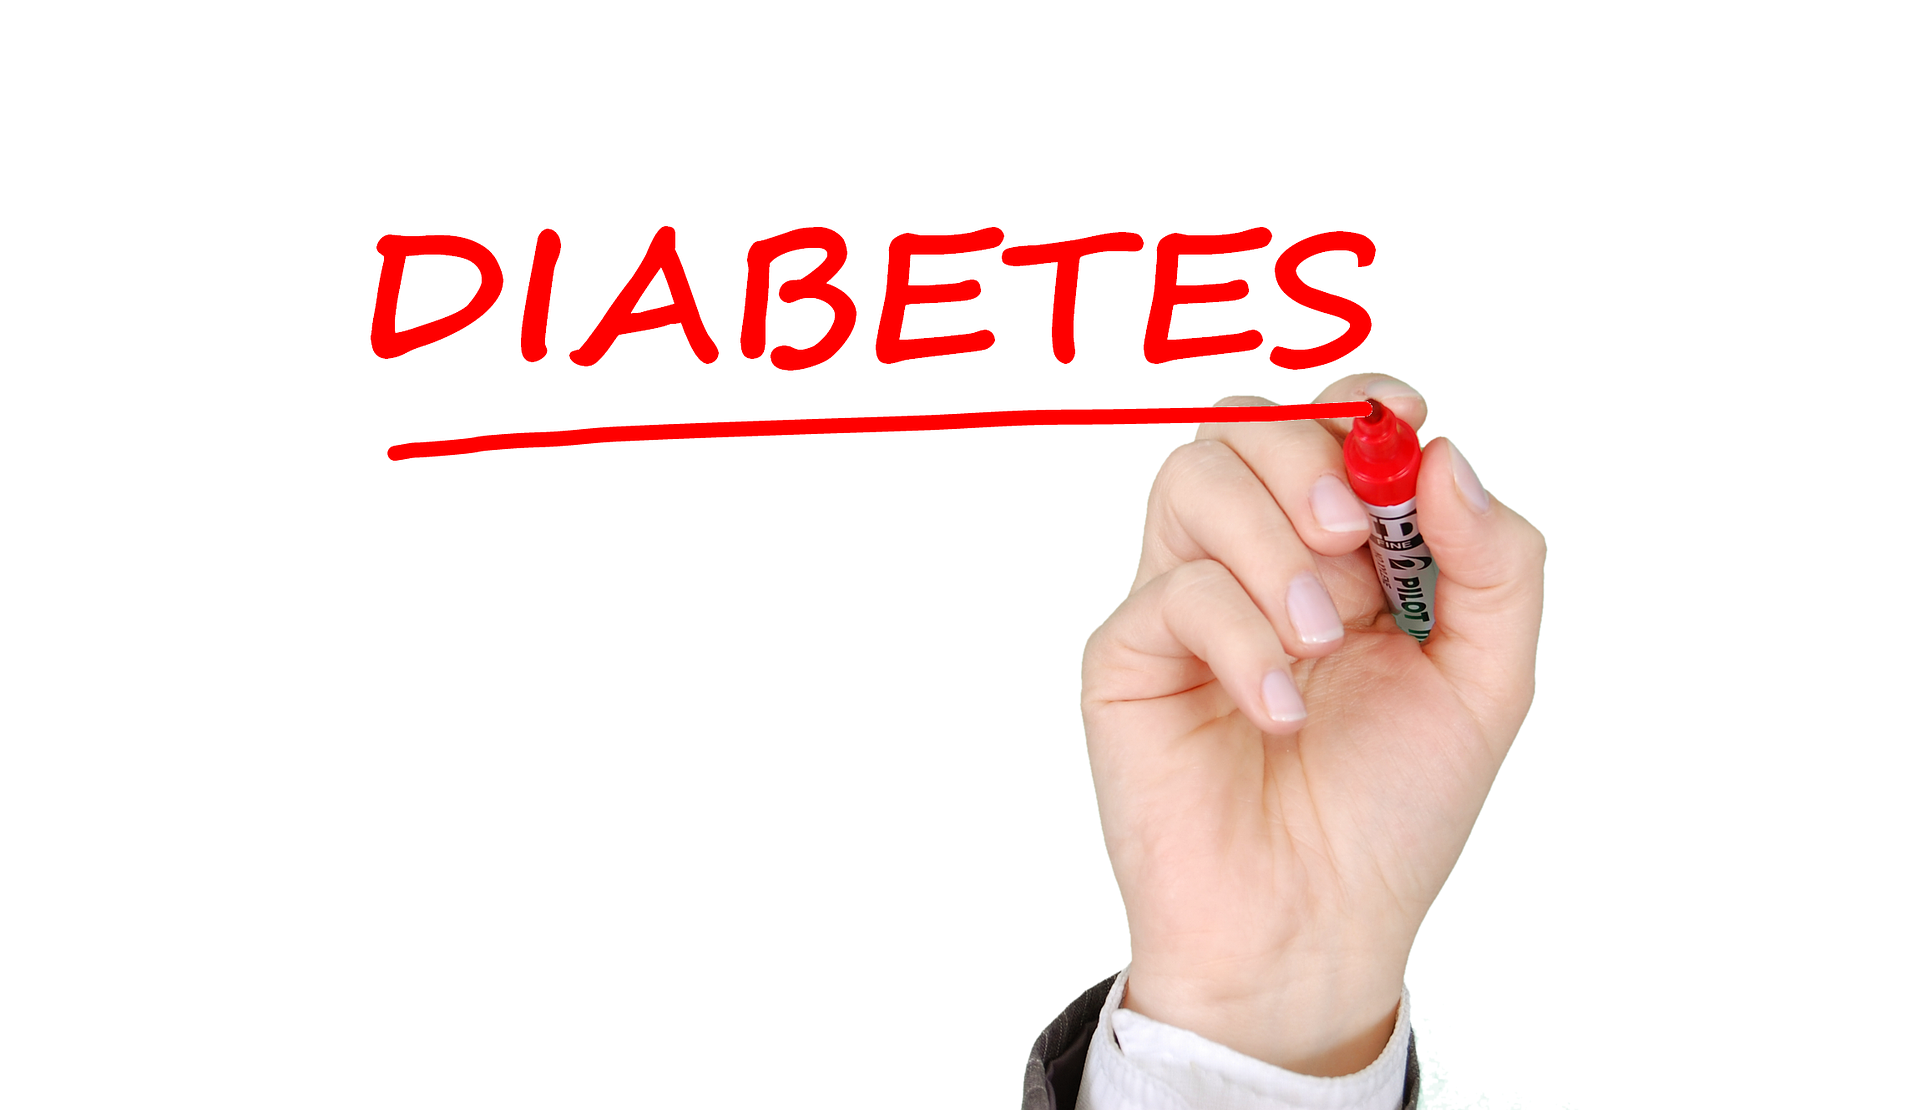 The importance of being in control of your diabetes